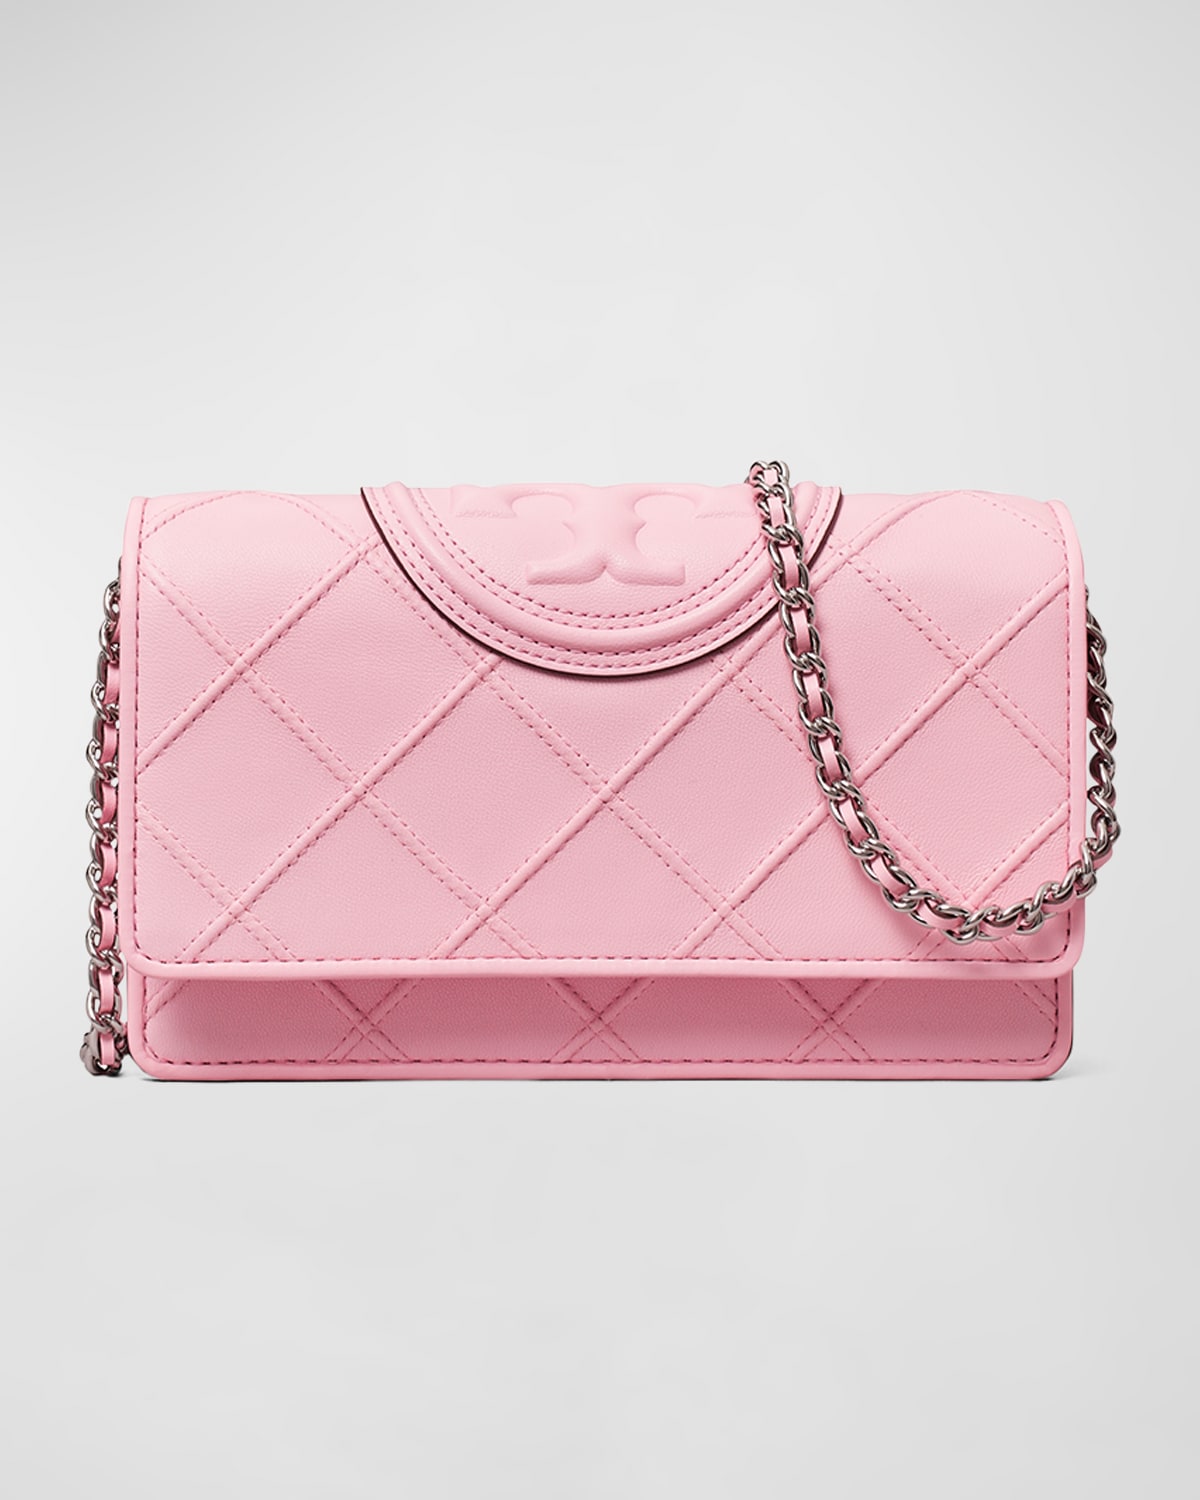 Tory Burch Fleming Woven Chain Wallet Shoulder Bag In Pink Plie